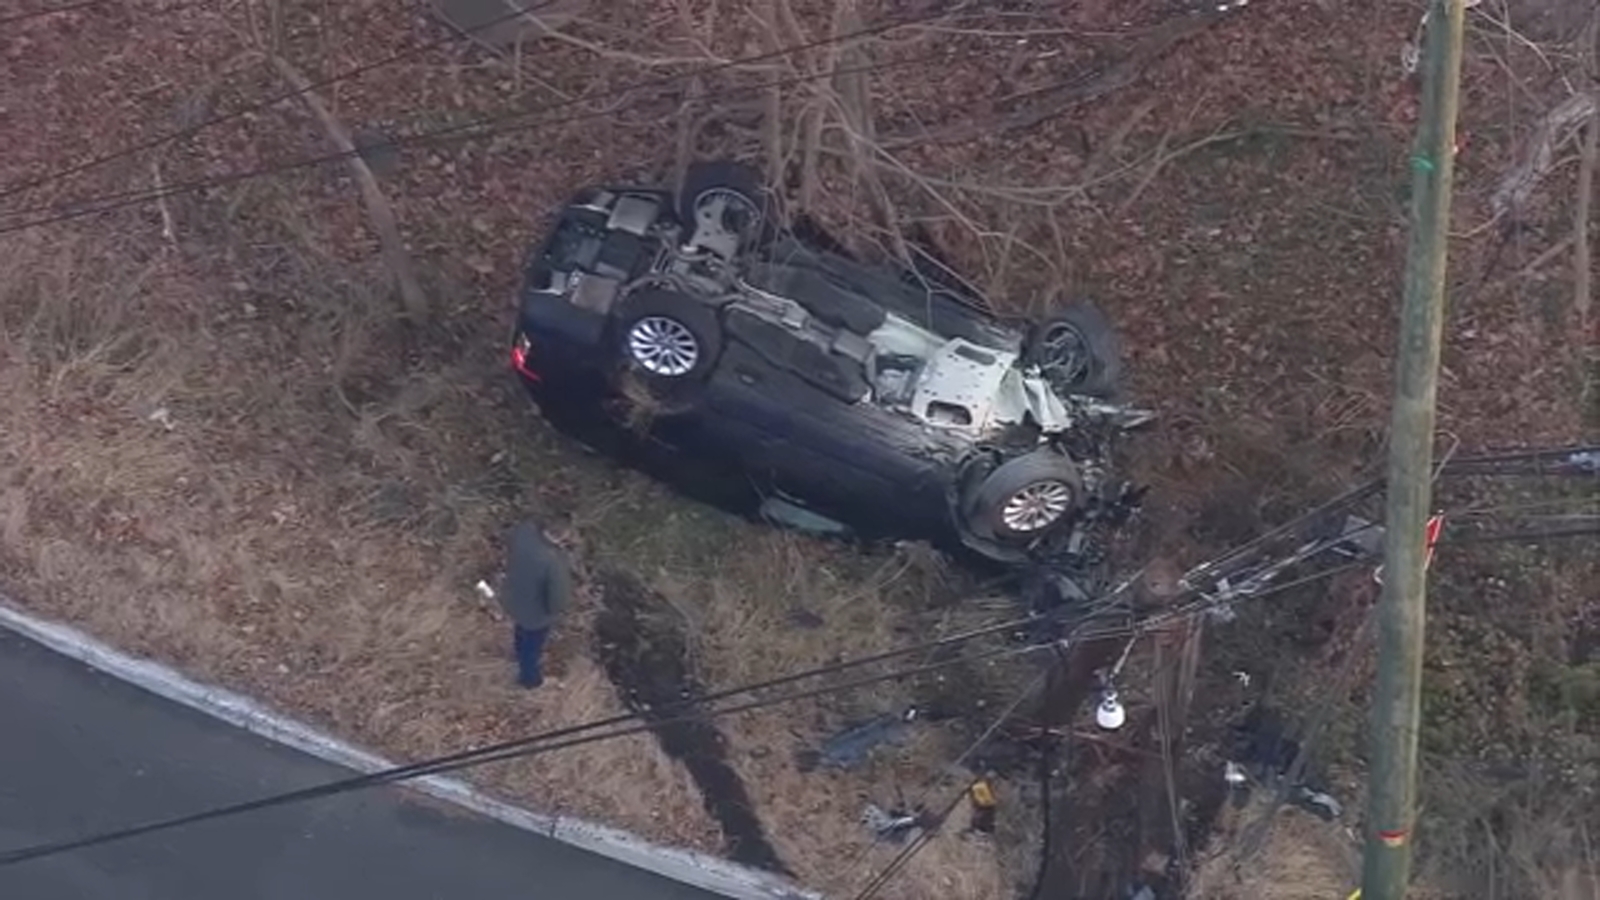 Police pursuit ends with crash on Route 17 in Saddle River